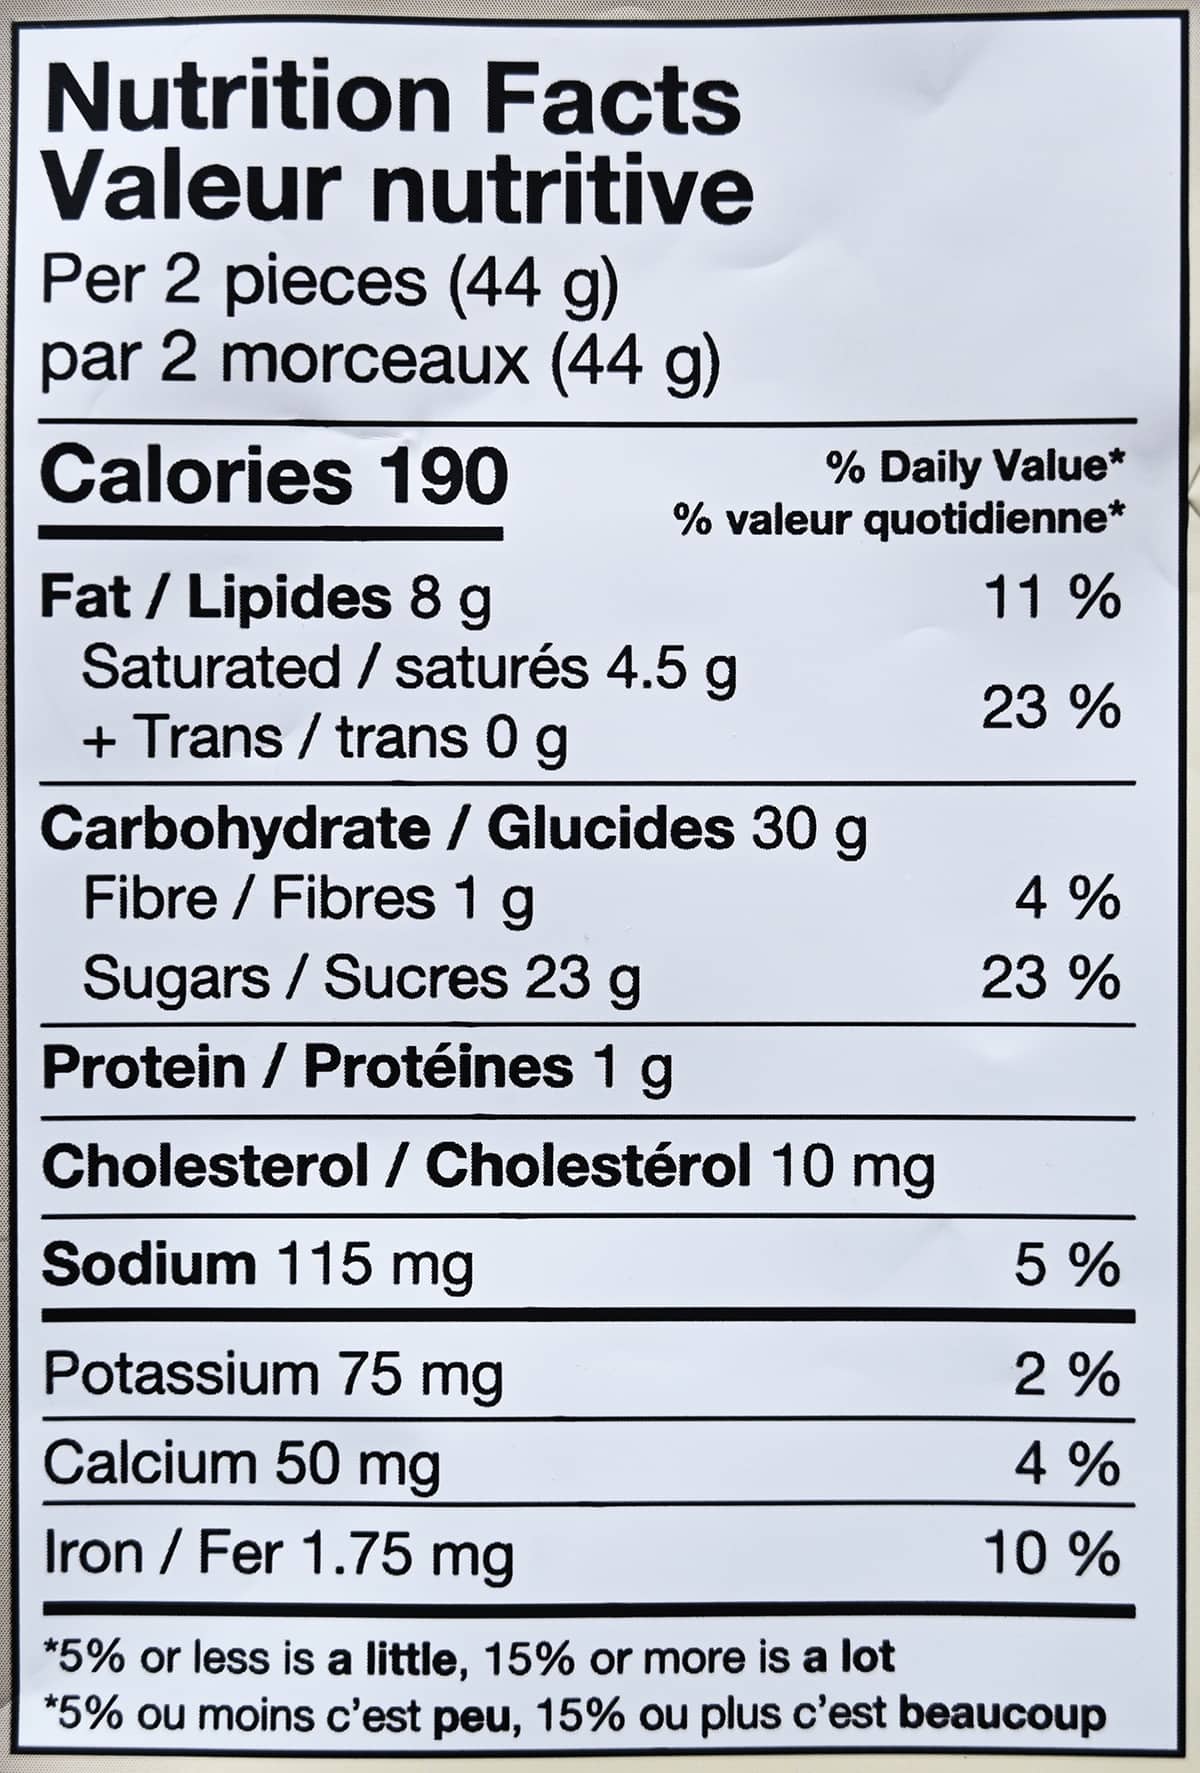 Image of the nutrition facts for the s'mores clusters from the back of the bag.